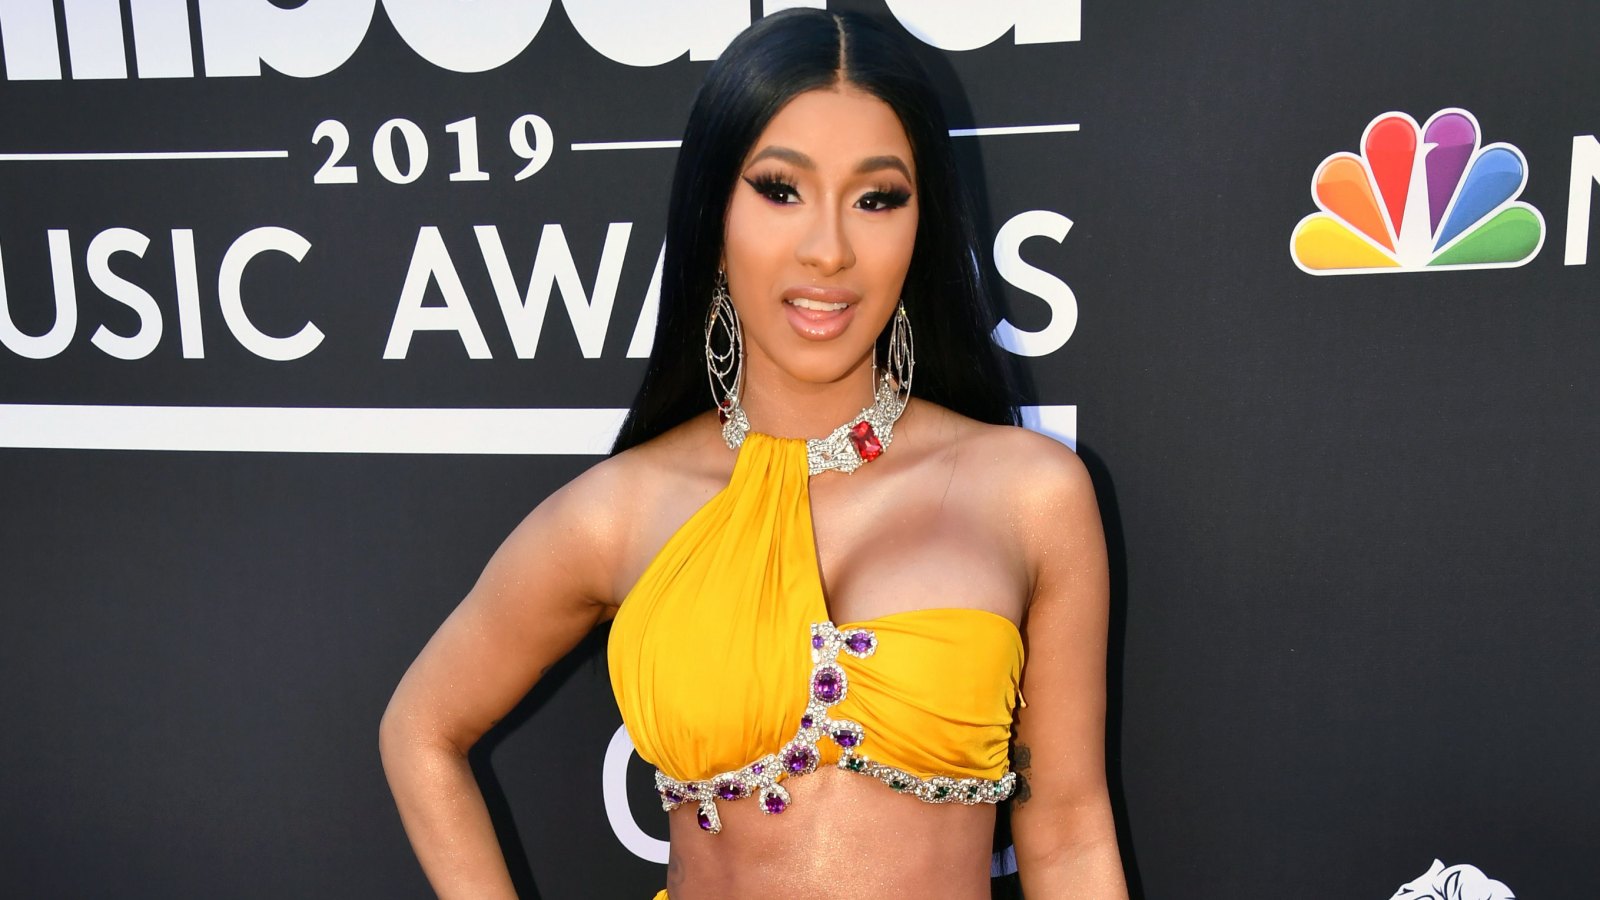 Cardi B Bares All to Give Fans a NSFW Body Lesson After 2019 Billboard Music Awards